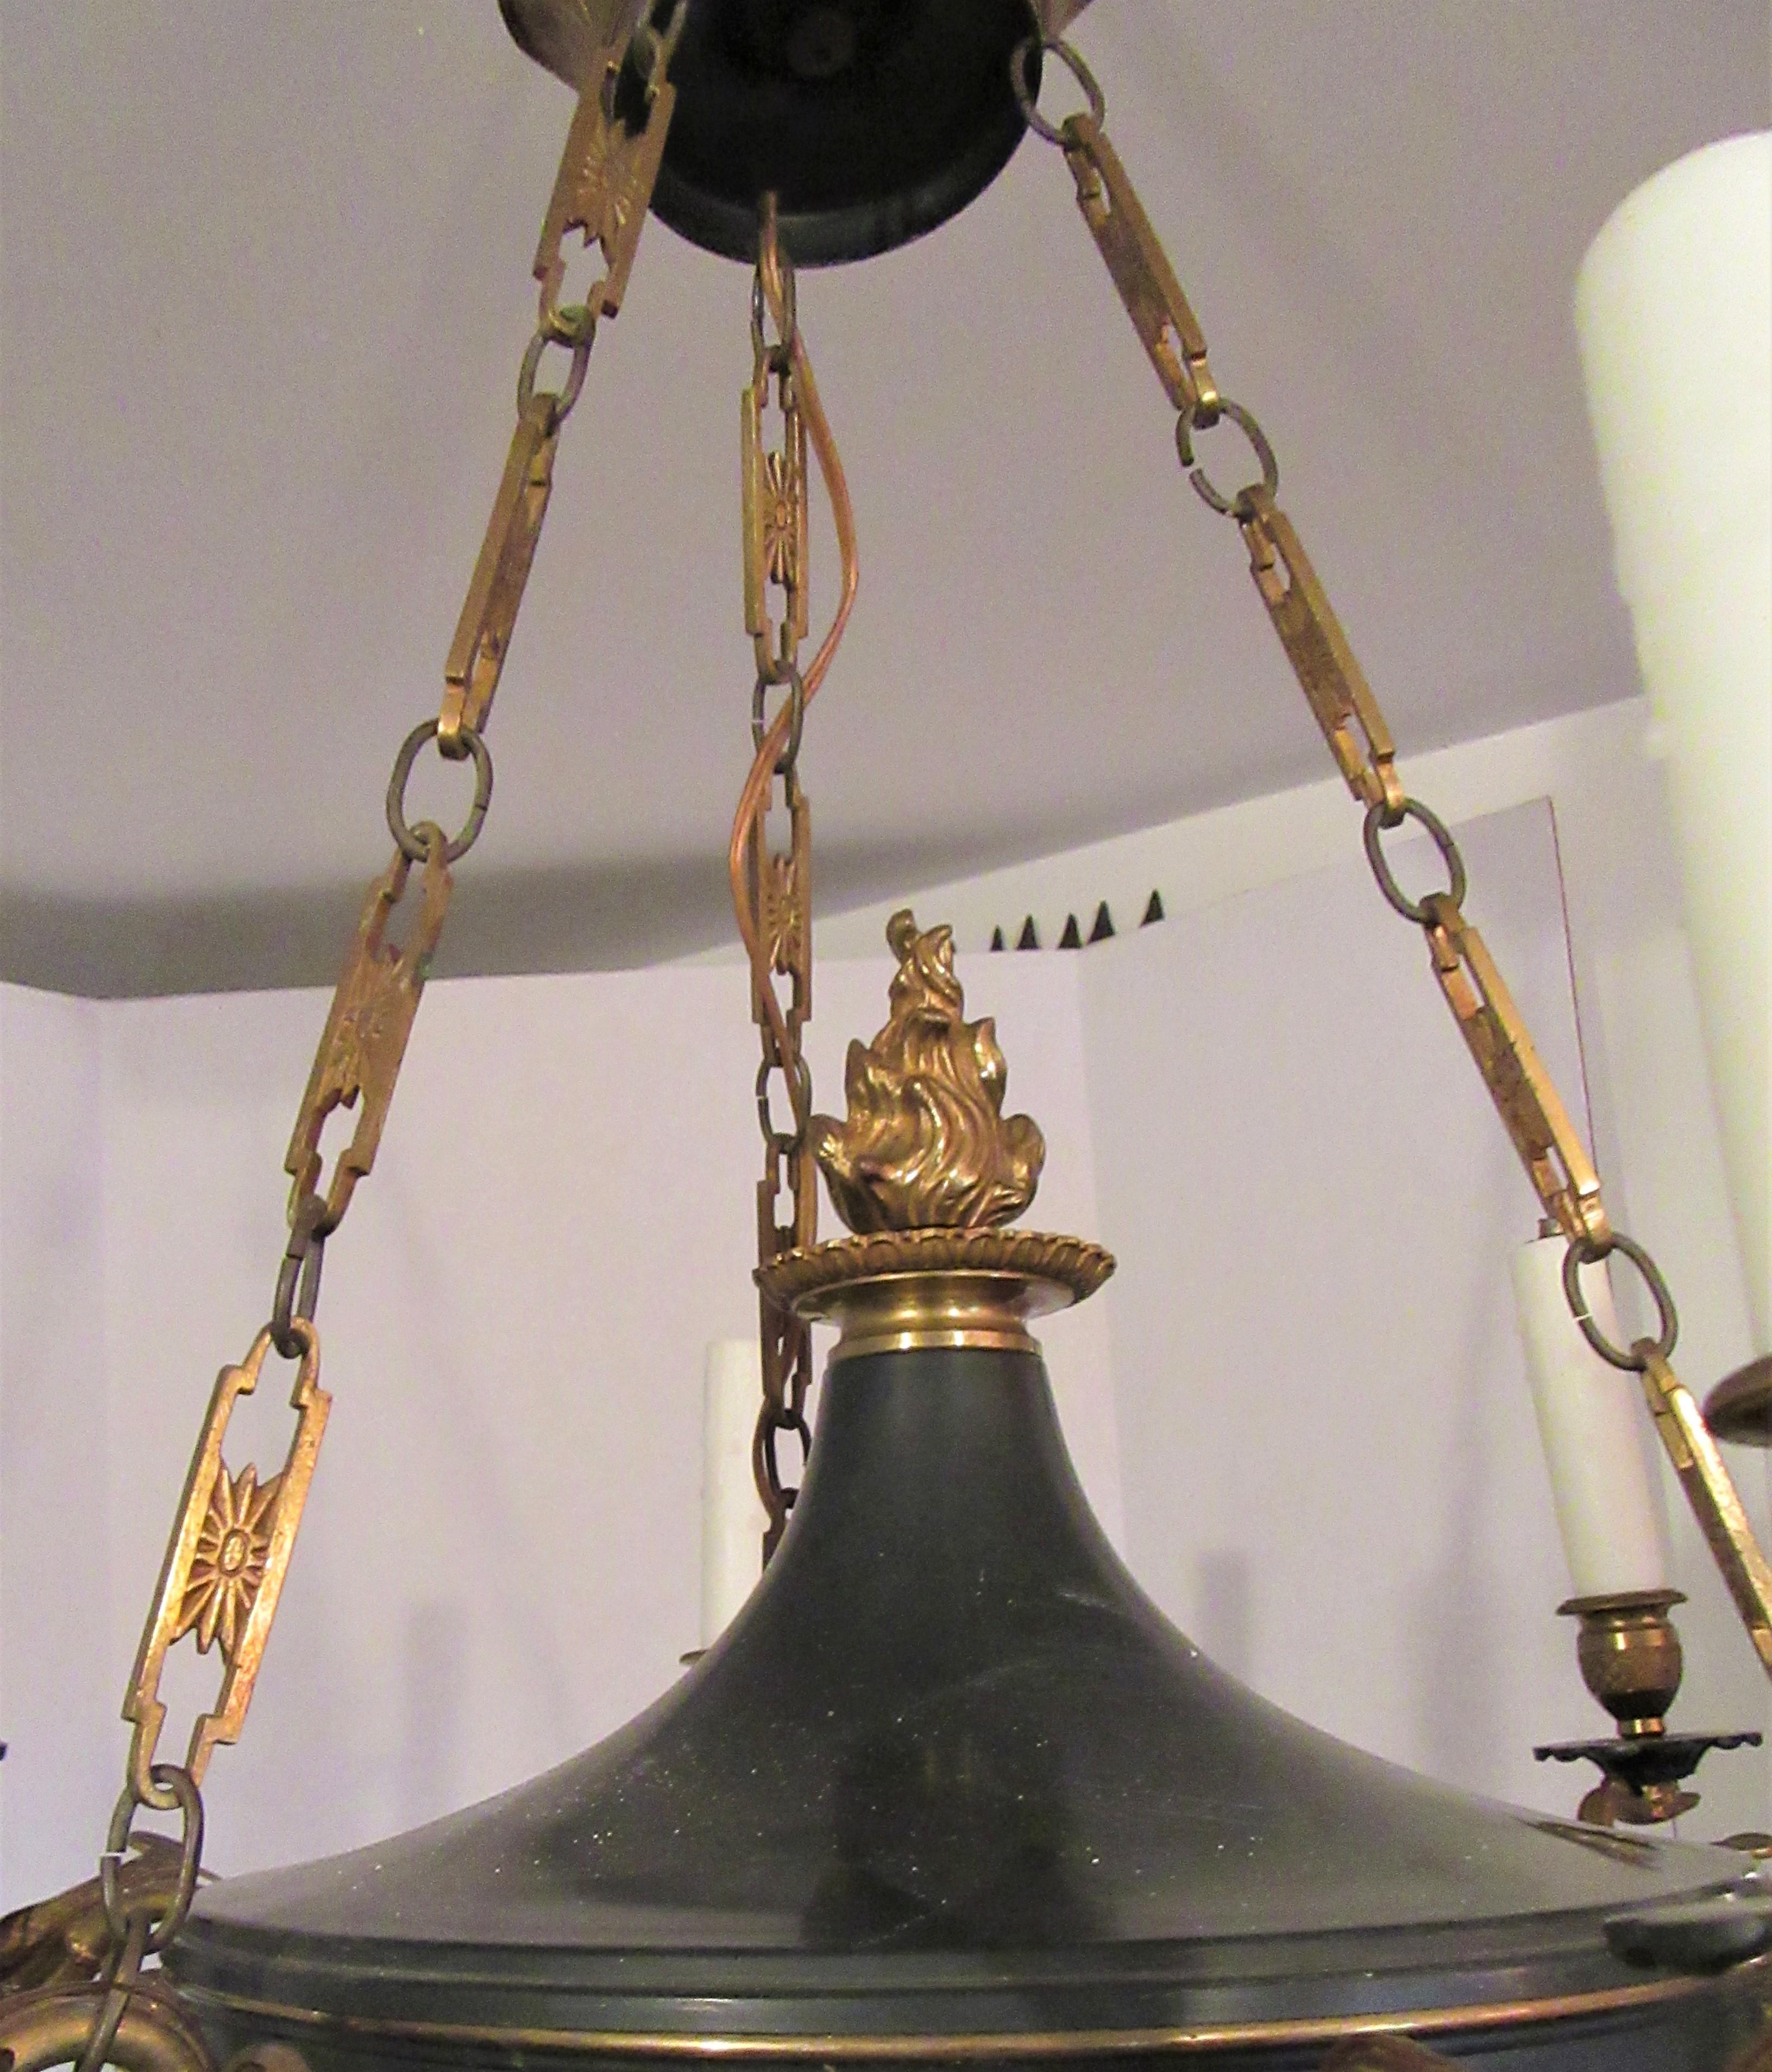 Gilt bronze and black tole six-light chandelier. Six long upturned arms with swan and foliate decoration. The tole center terminates in a central leaf and large acorn finial. Original chain and ceiling rose, good scale and nicely cast.